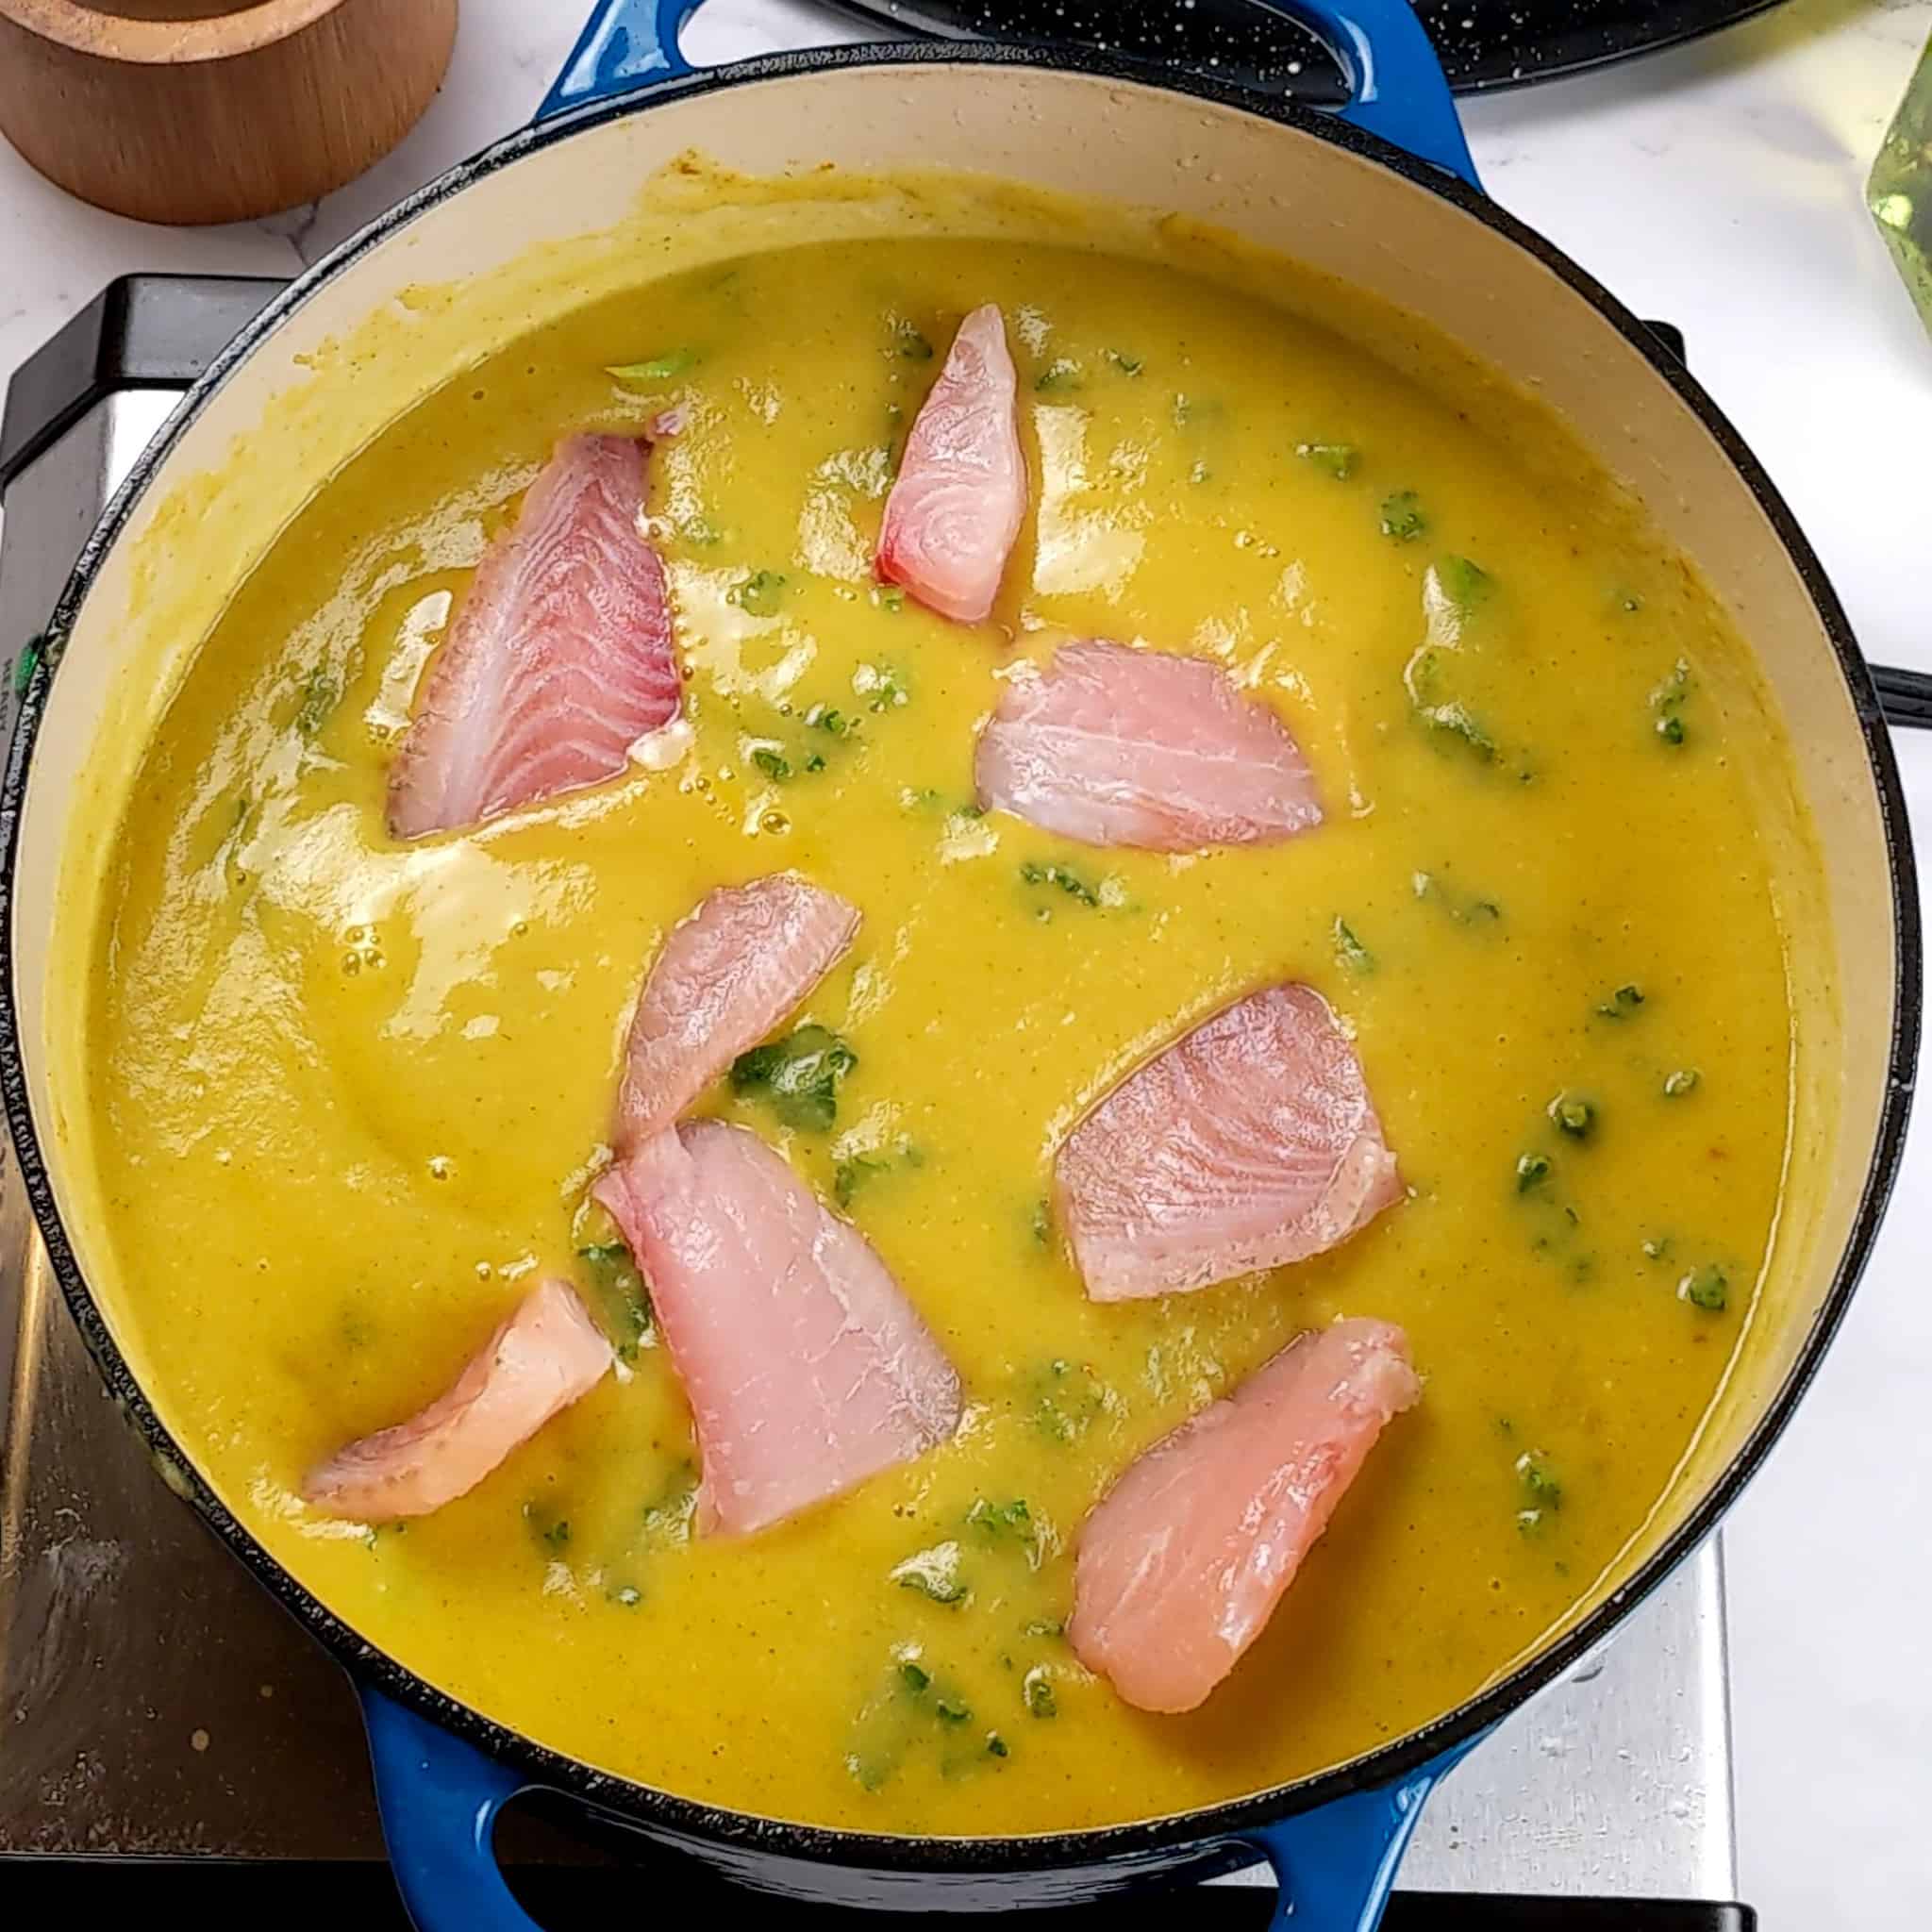 fresh tilapia fish chunks added to the creamy curry potato coconut and kale soup for the Best Fragrant Creamy Potato Coconut Curry Fish Soup recipe